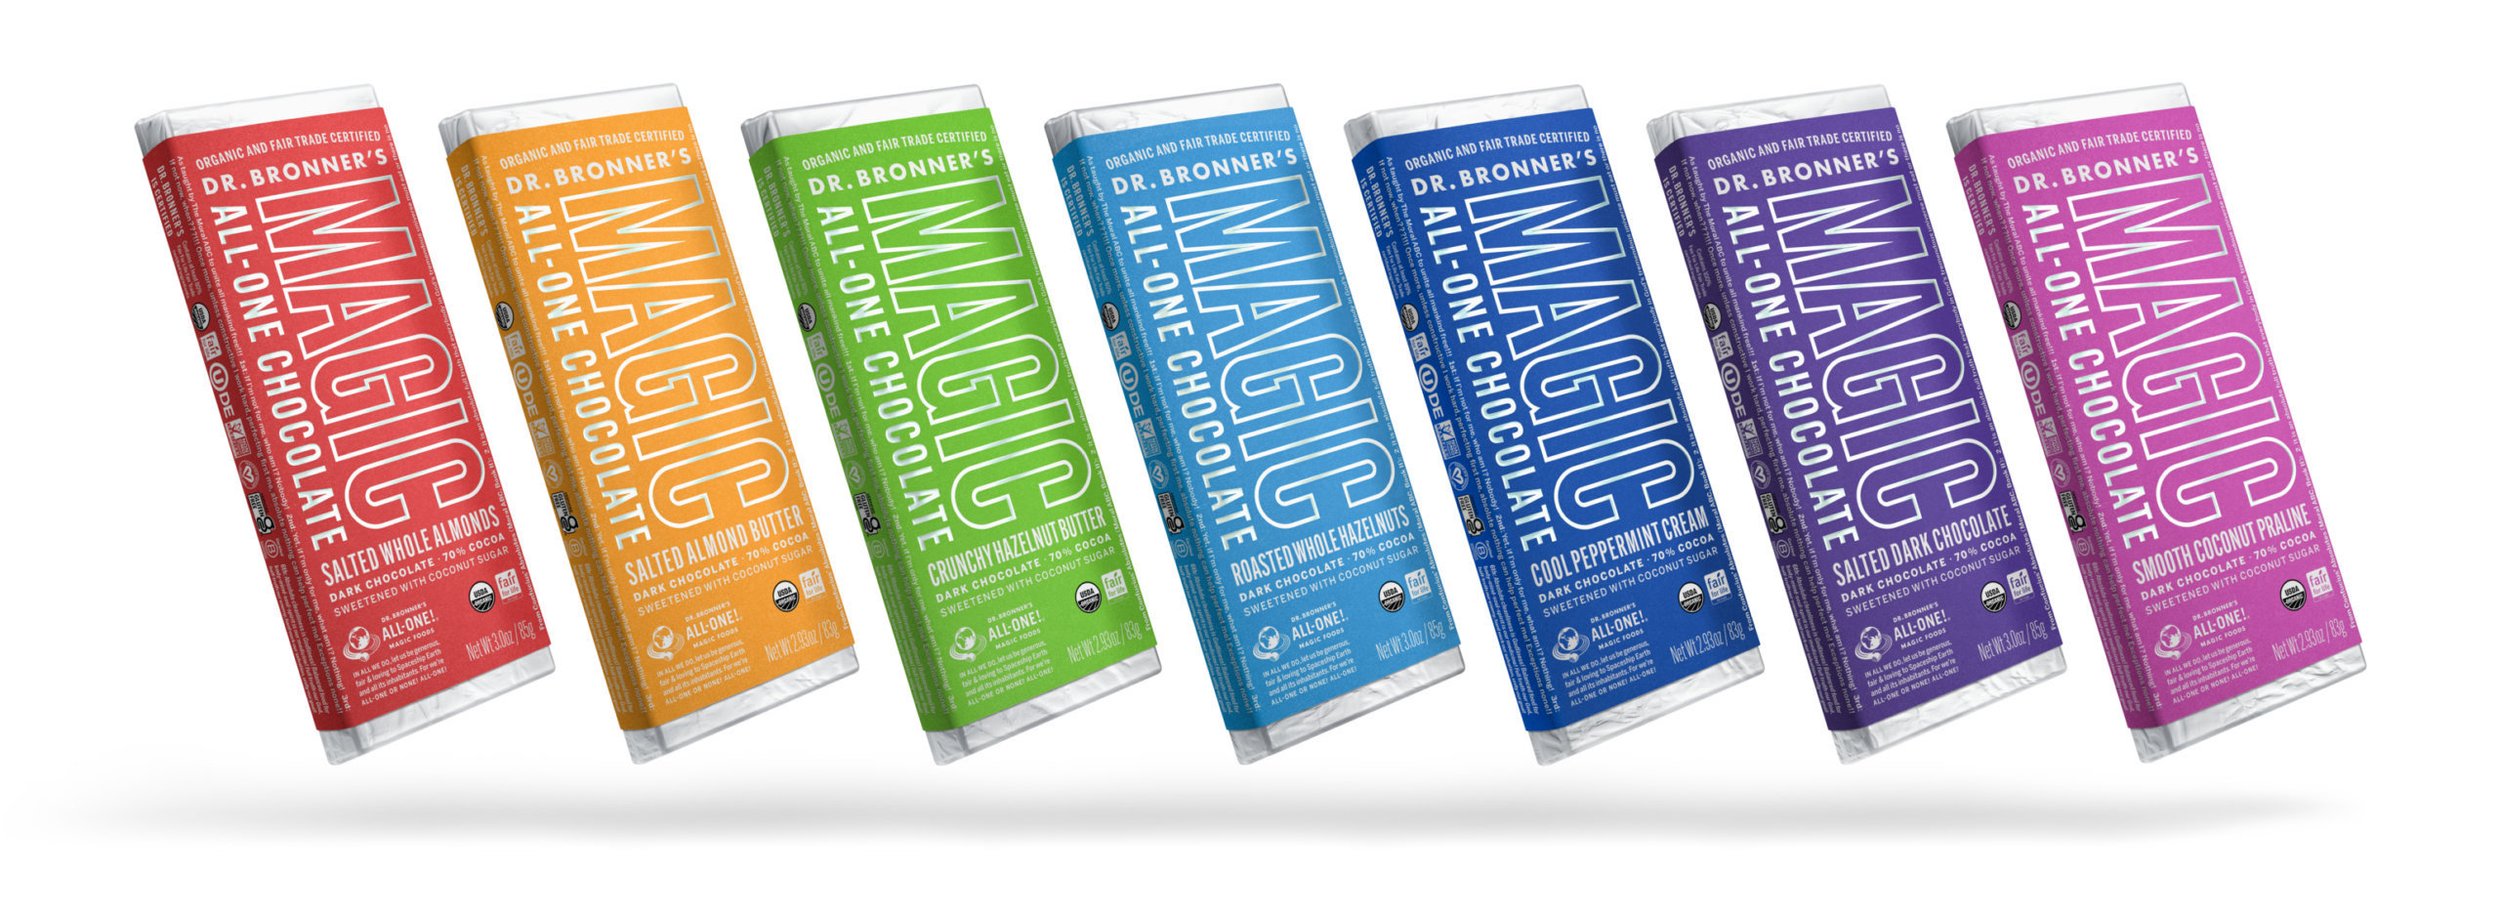 Dr. Bronner's Makes Chocolate Bars Now and It's Great